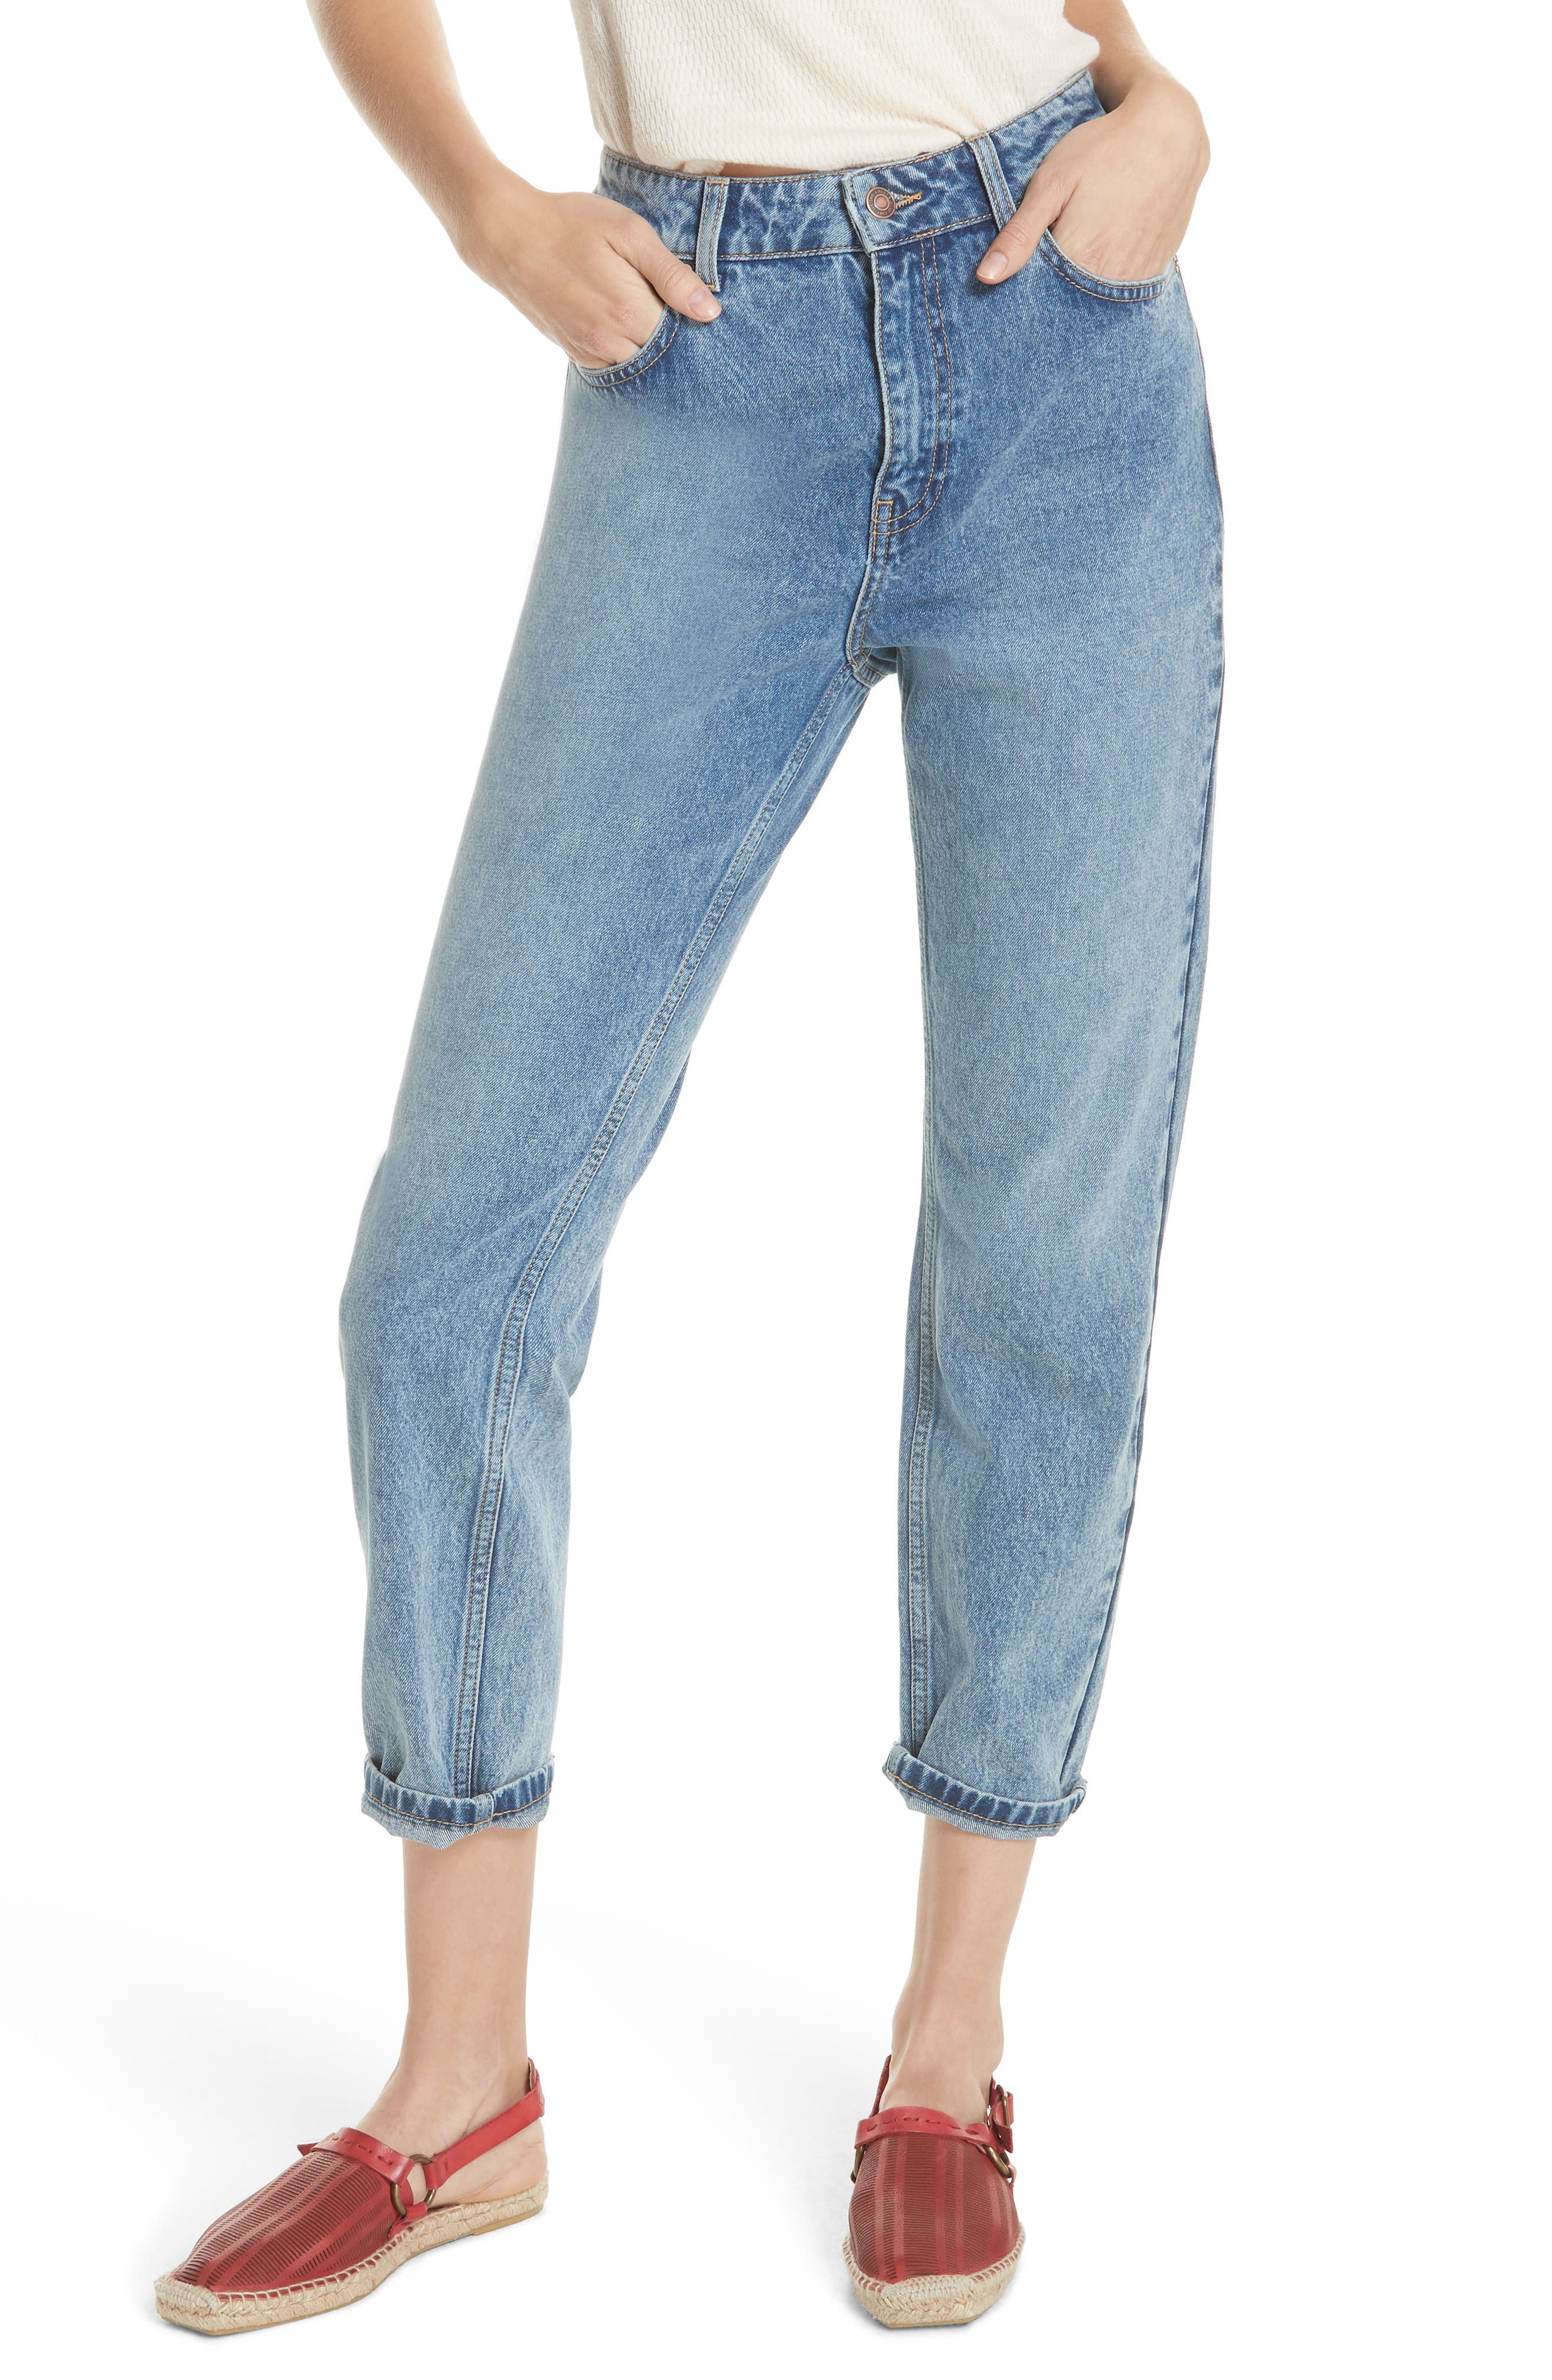 ankle free jeans